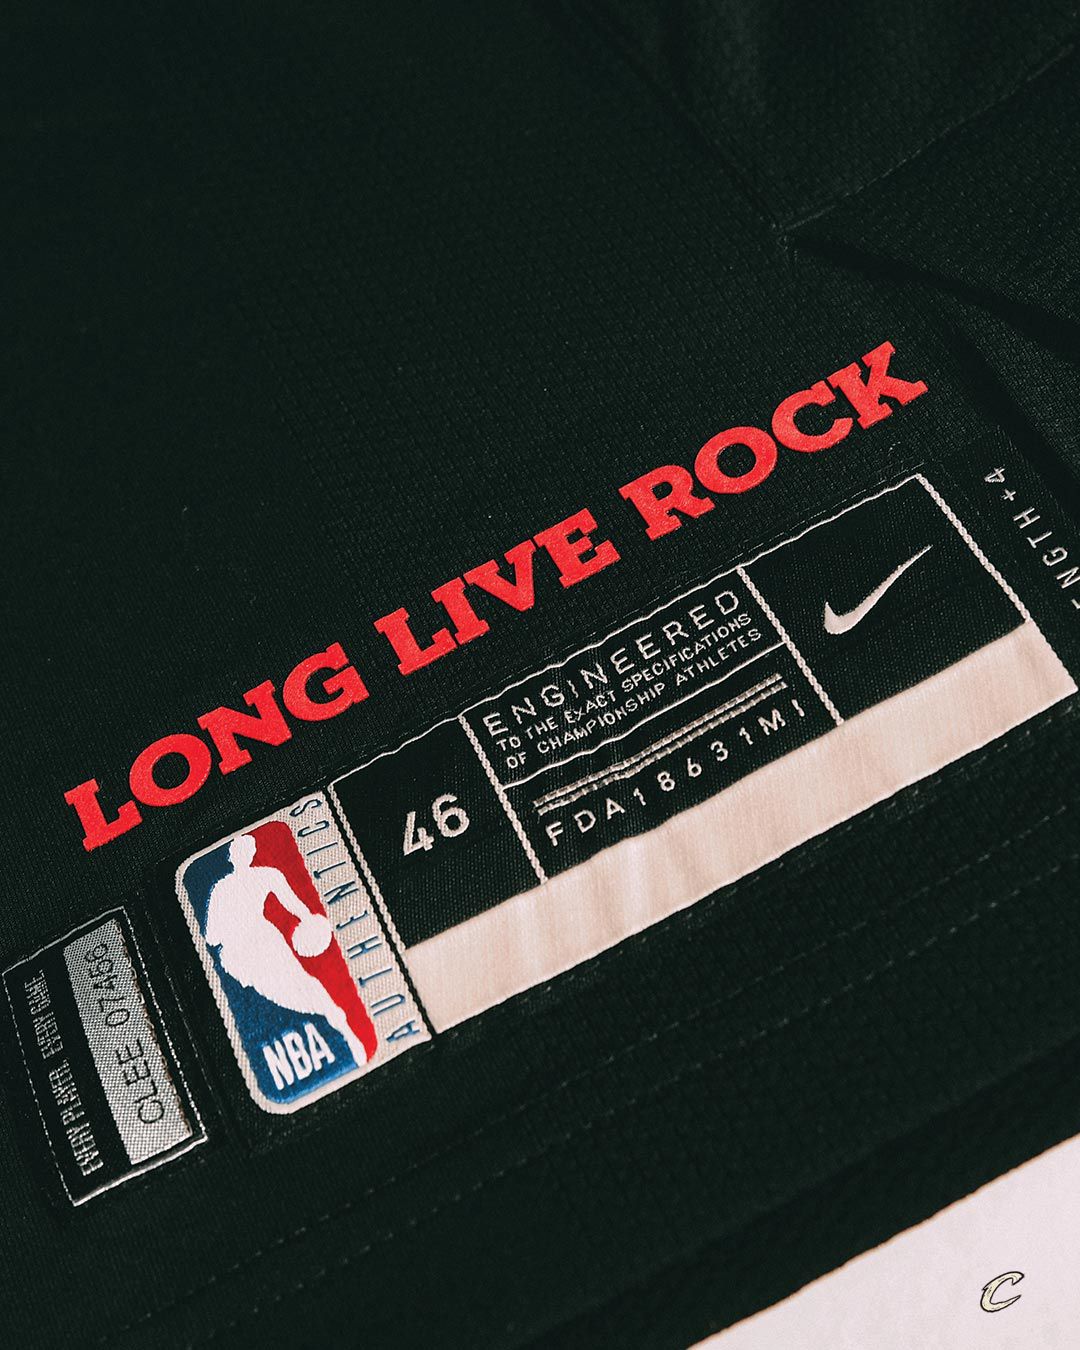 Cleveland Cavaliers' City Edition uniforms celebrate rock and roll roots 